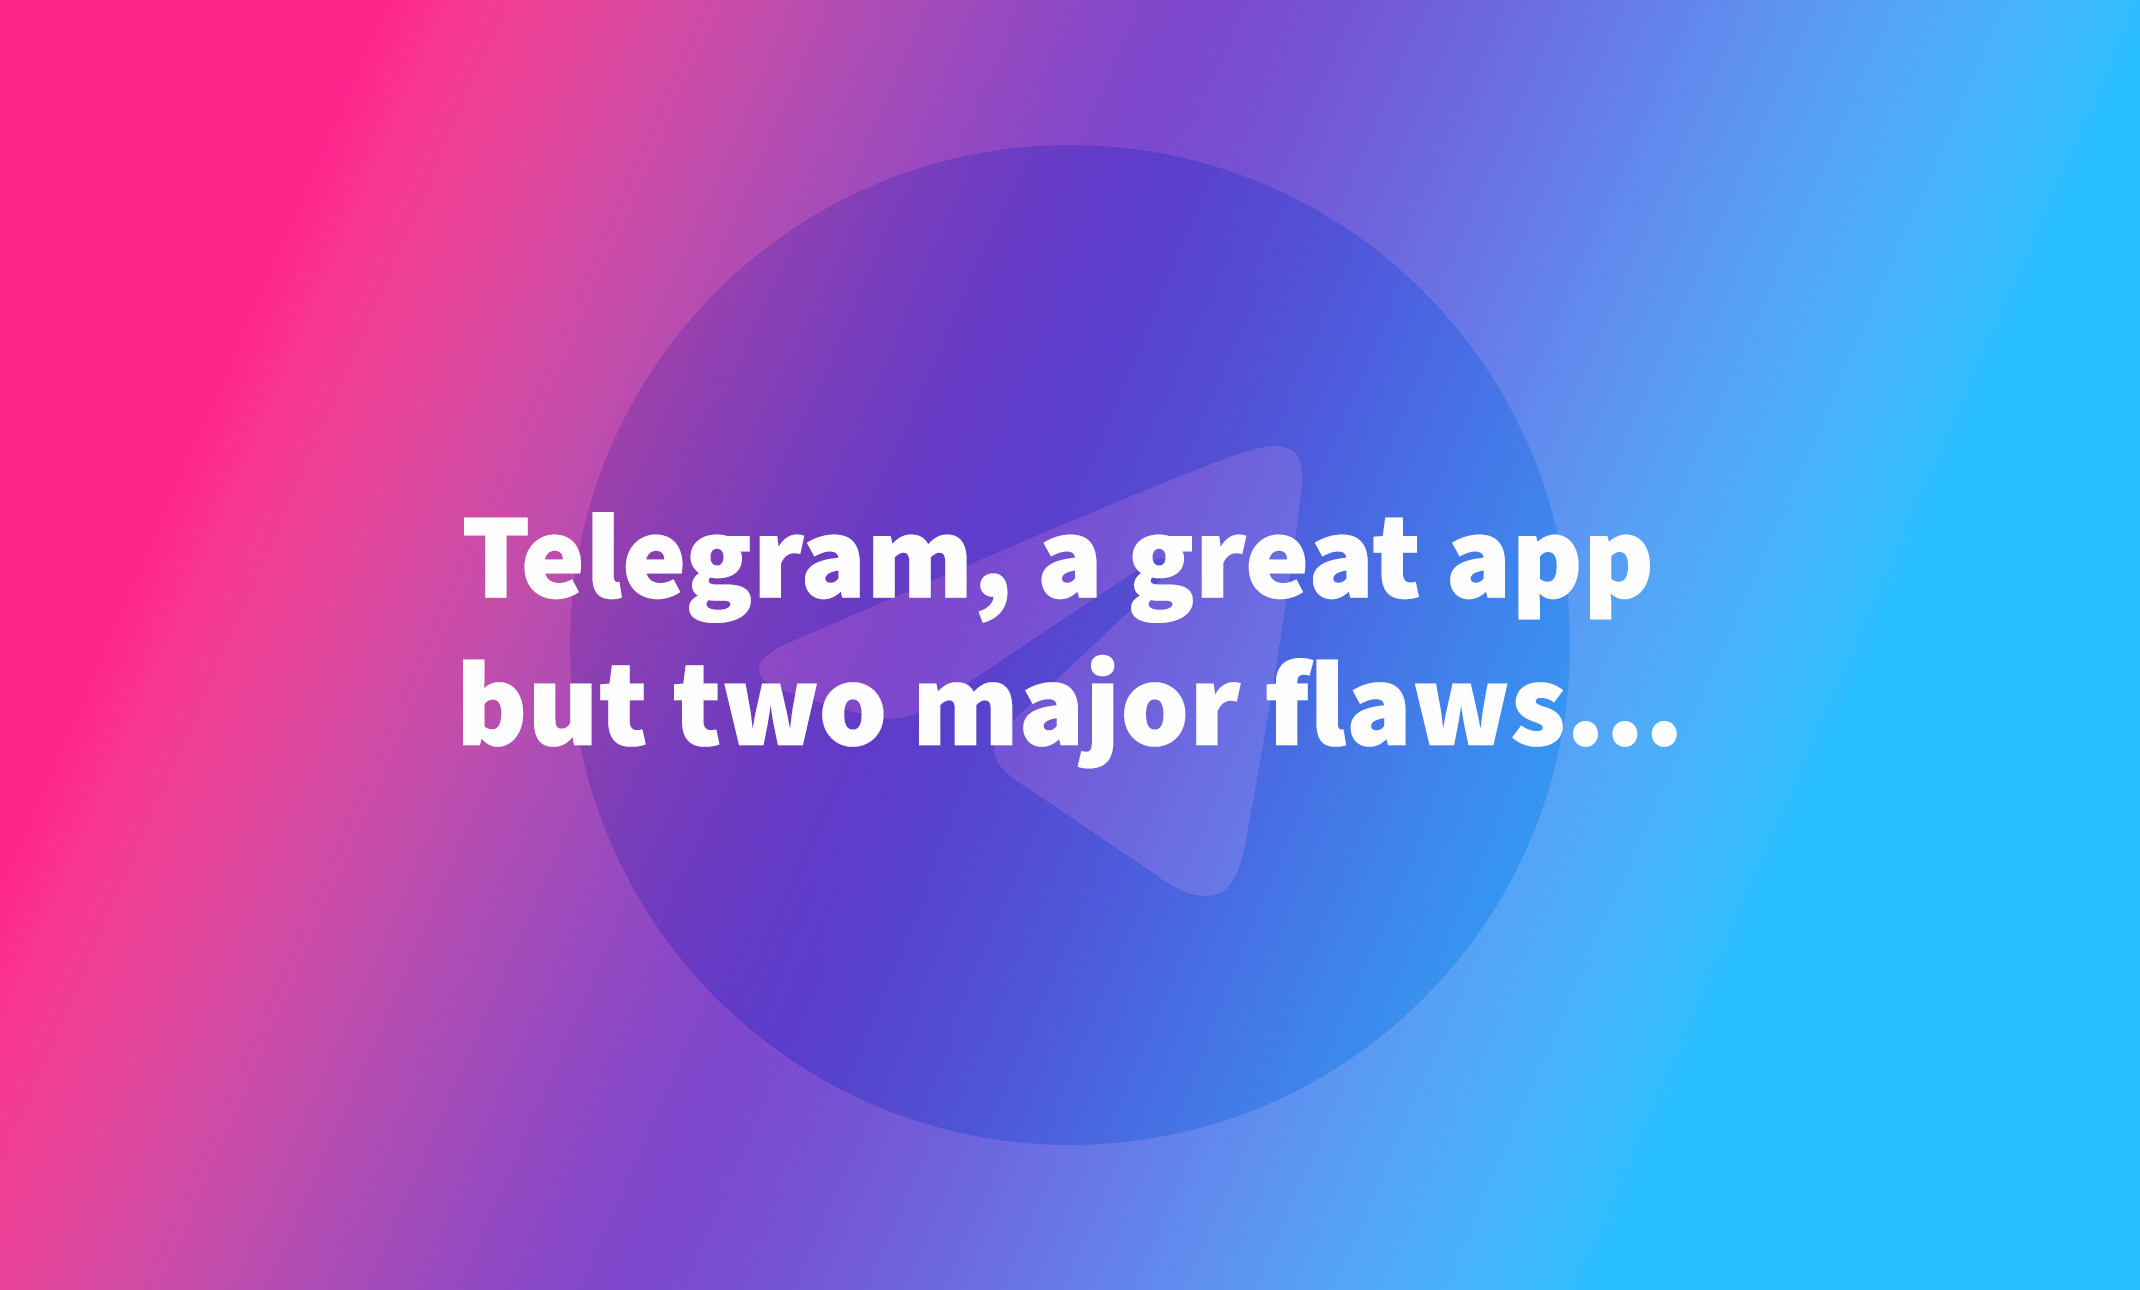 Telegram, a great app but two major flaws...